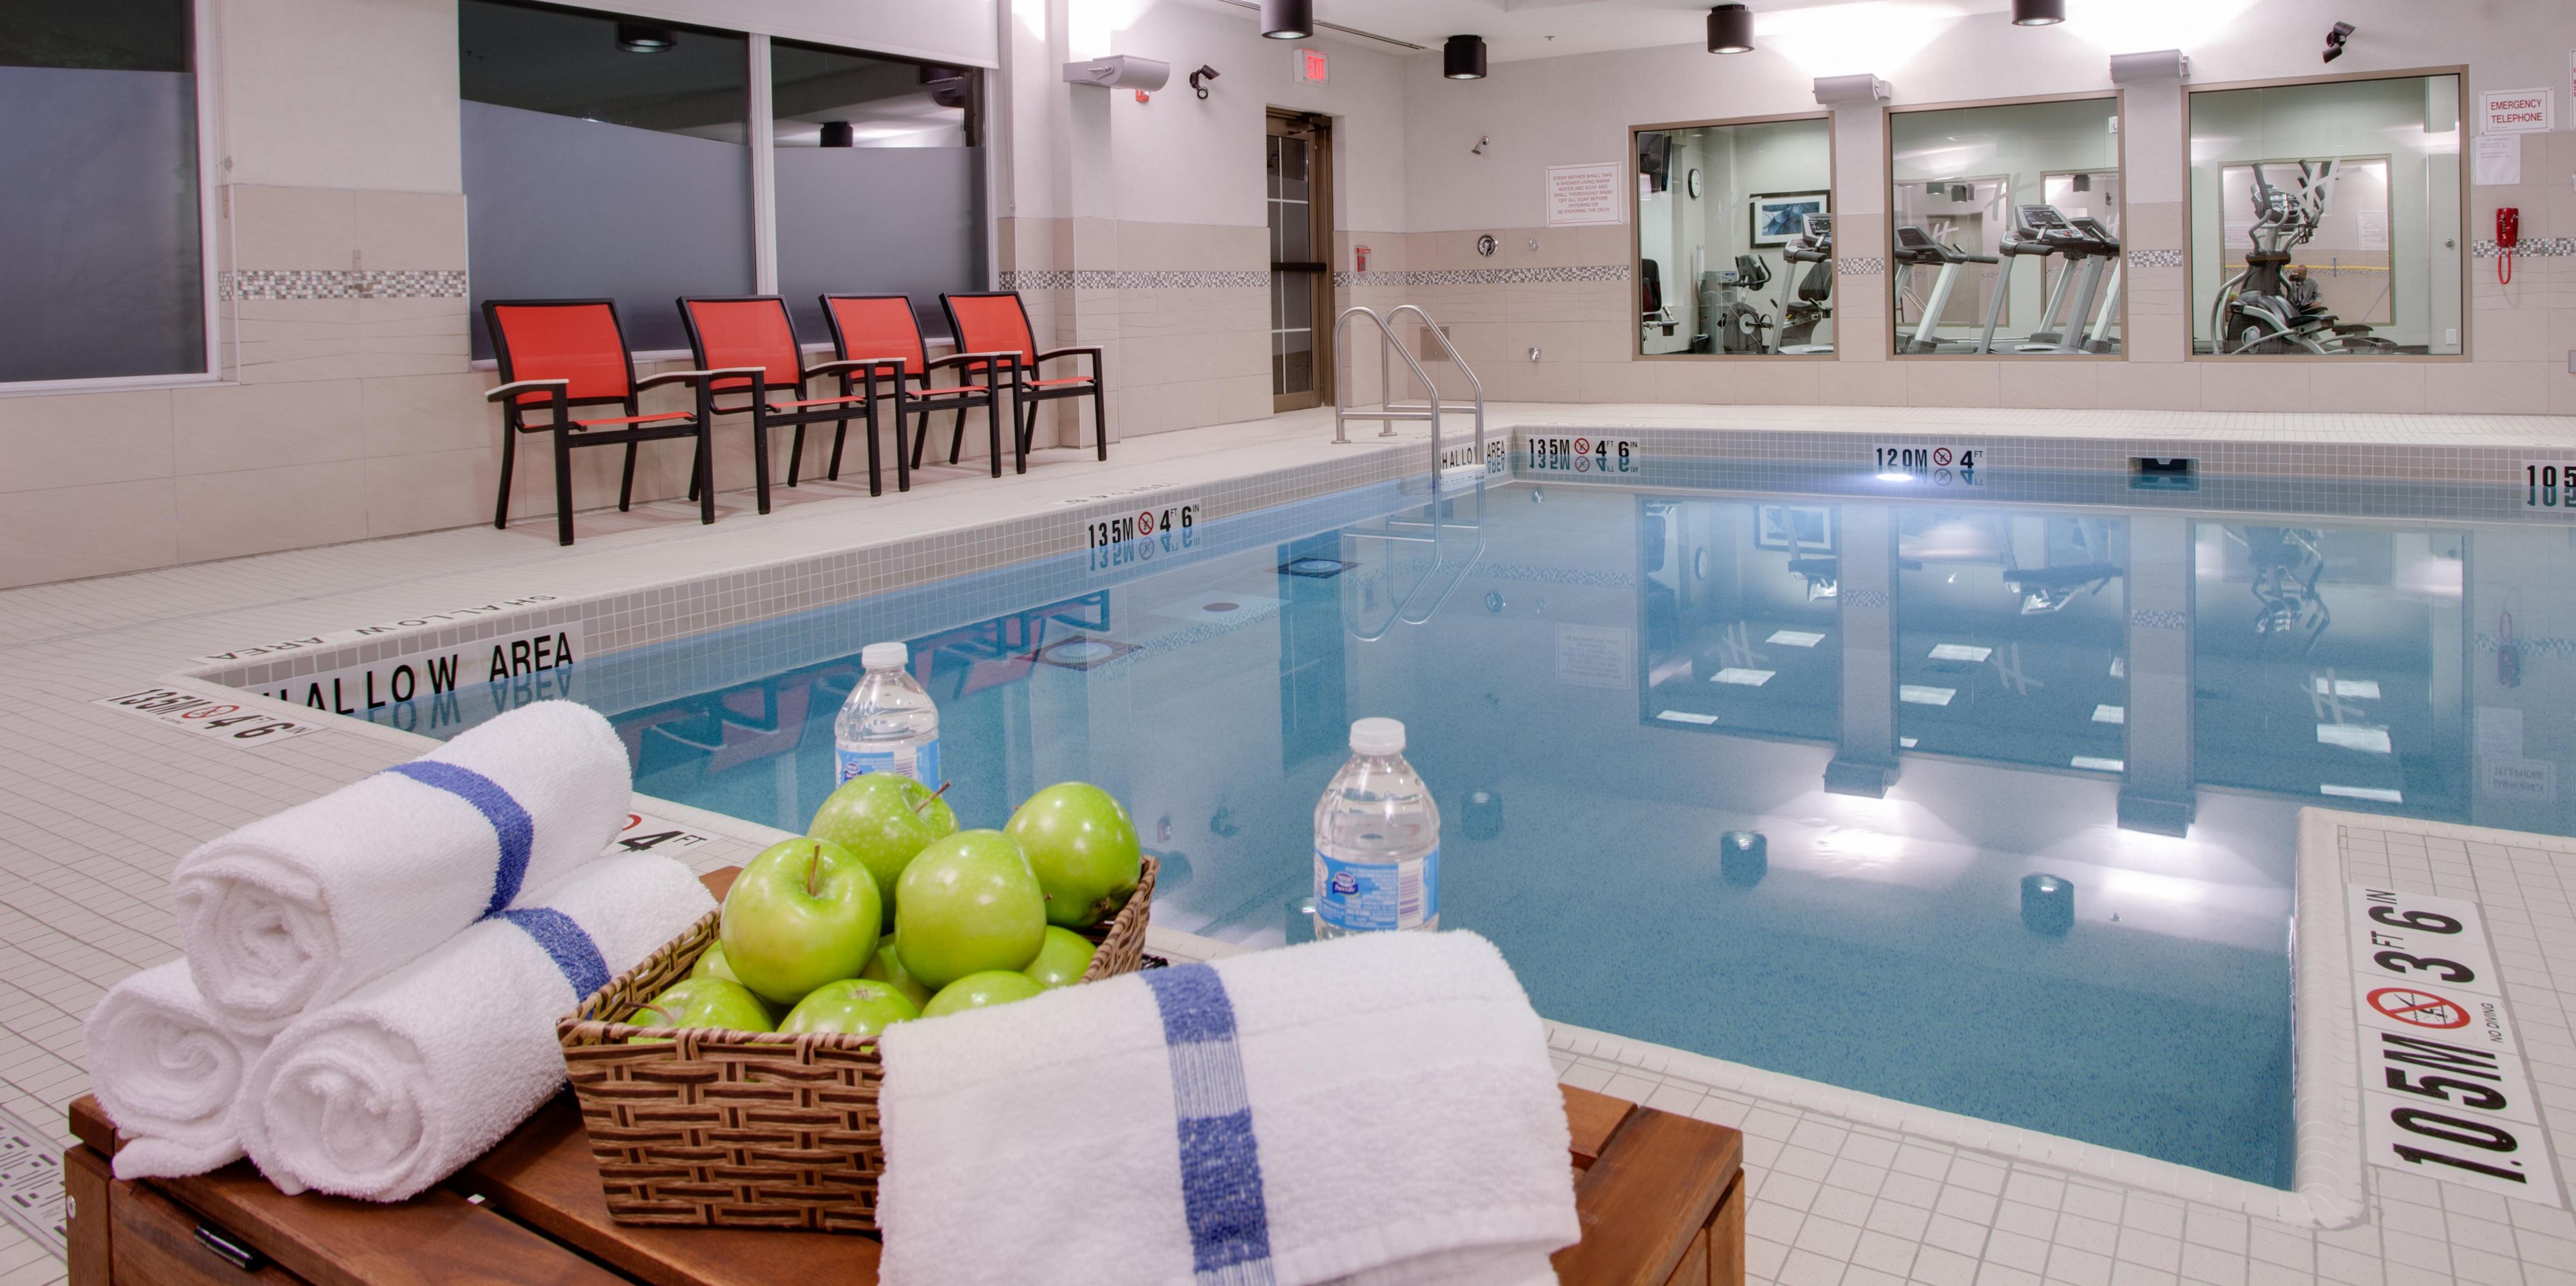 We have the perfect "ME" time' or we've got fun for the whole family! Take a dip in our beautiful heated indoor swimming pool. A perfect way to start or end your day and what better way to tire the kids out before a great nights' sleep.